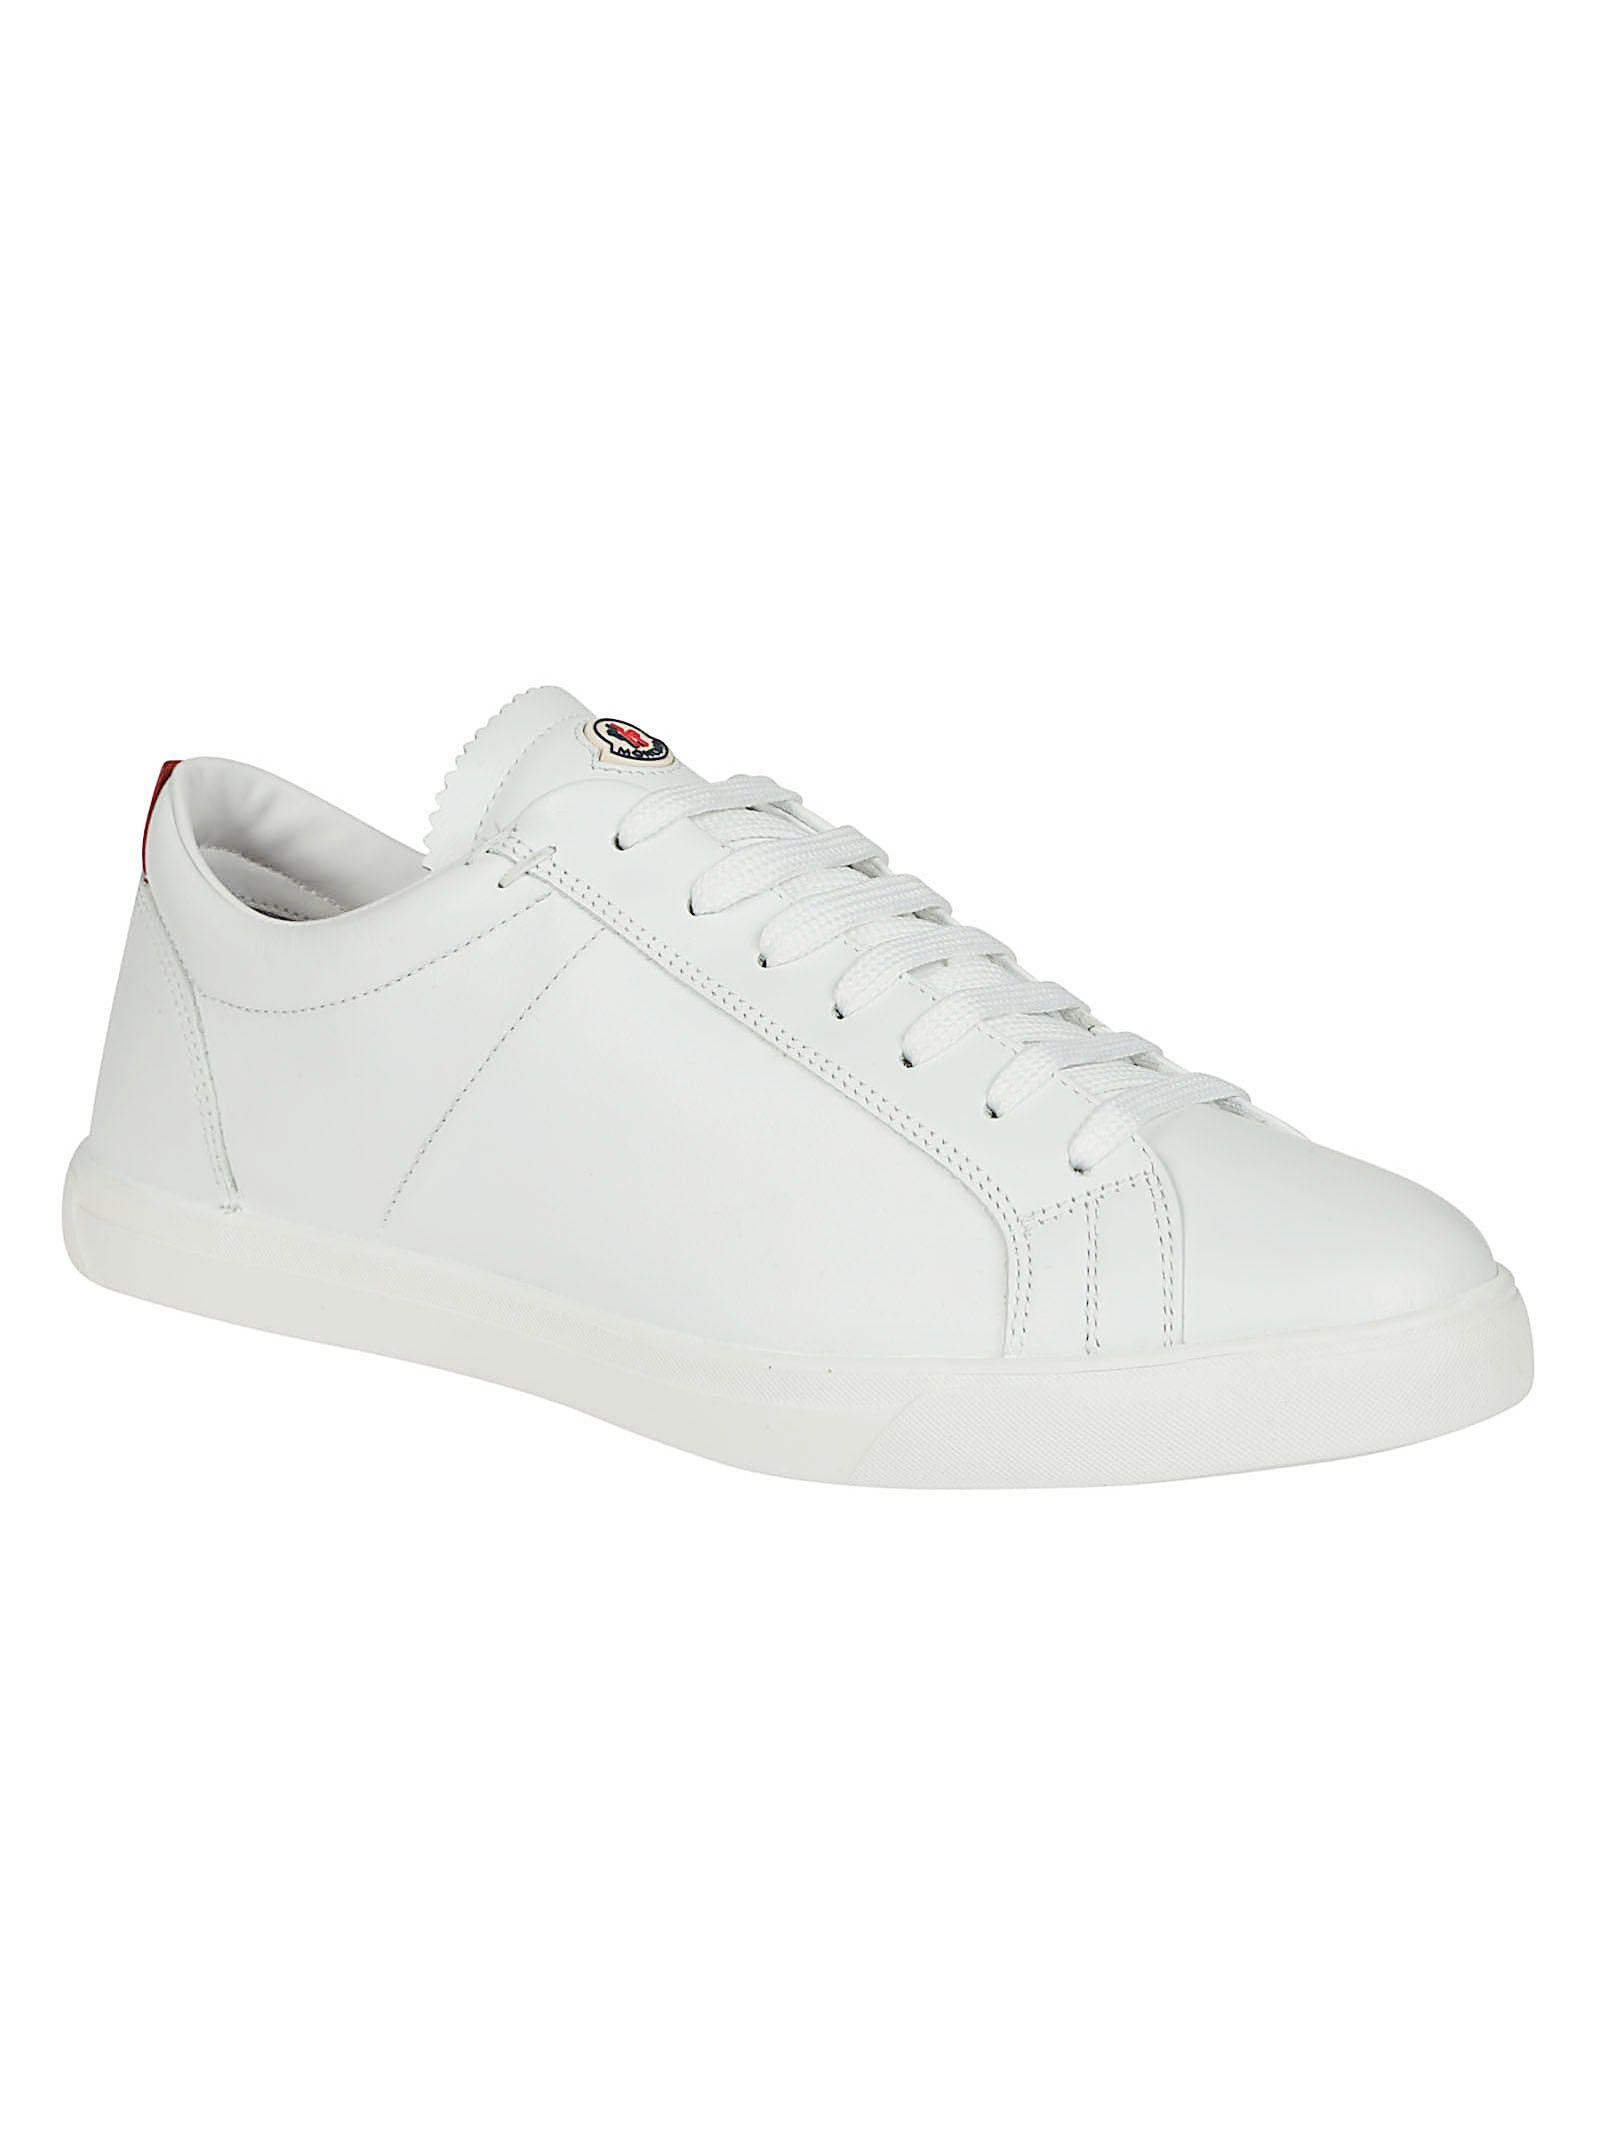 Moncler - Moncler Low-top Sneakers - White, Men's Sneakers | Italist